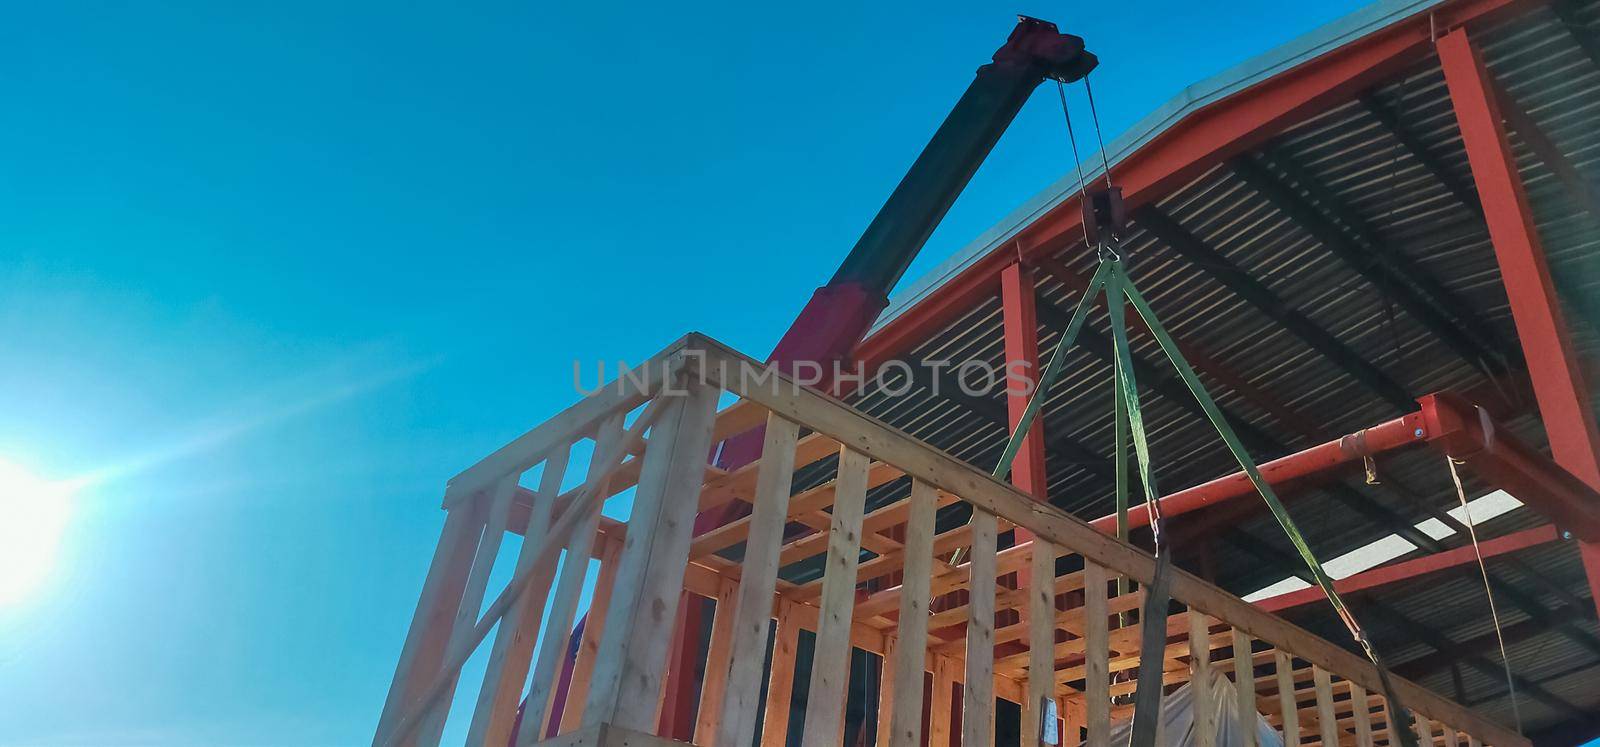 Boom truck crane lifting the machinery which storage in wooden box to stored in warehouse. Machinery transport and delivery business. Boom truck crane working at job site. Crane hoisting wooden box.